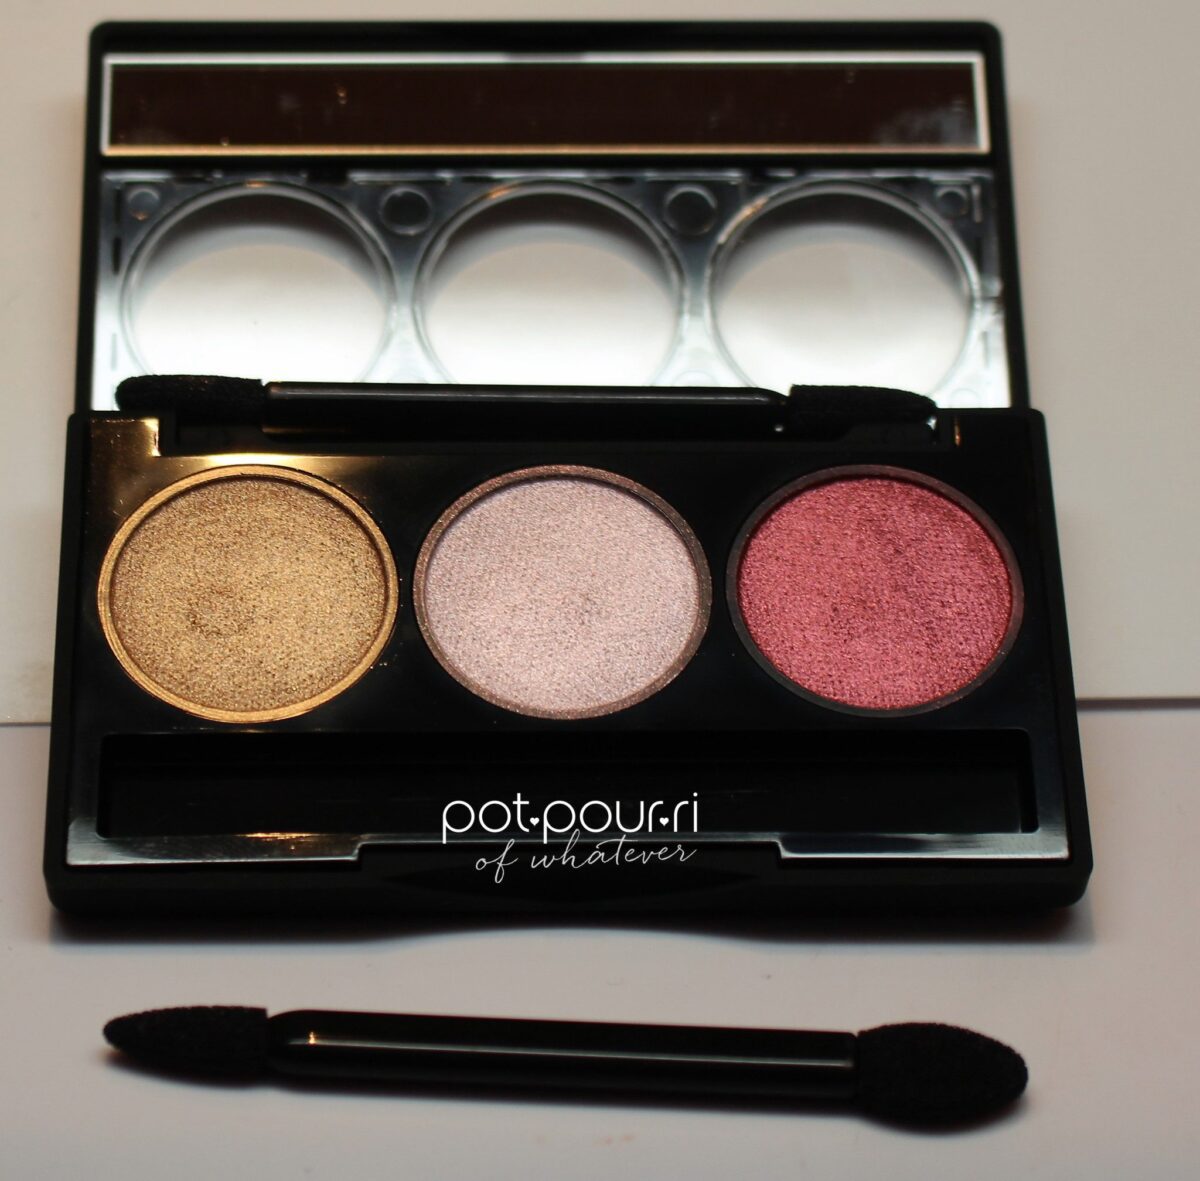 Stellar-Stardust-lip-palette-includes-thin-mirror-and-double-ended-applicator